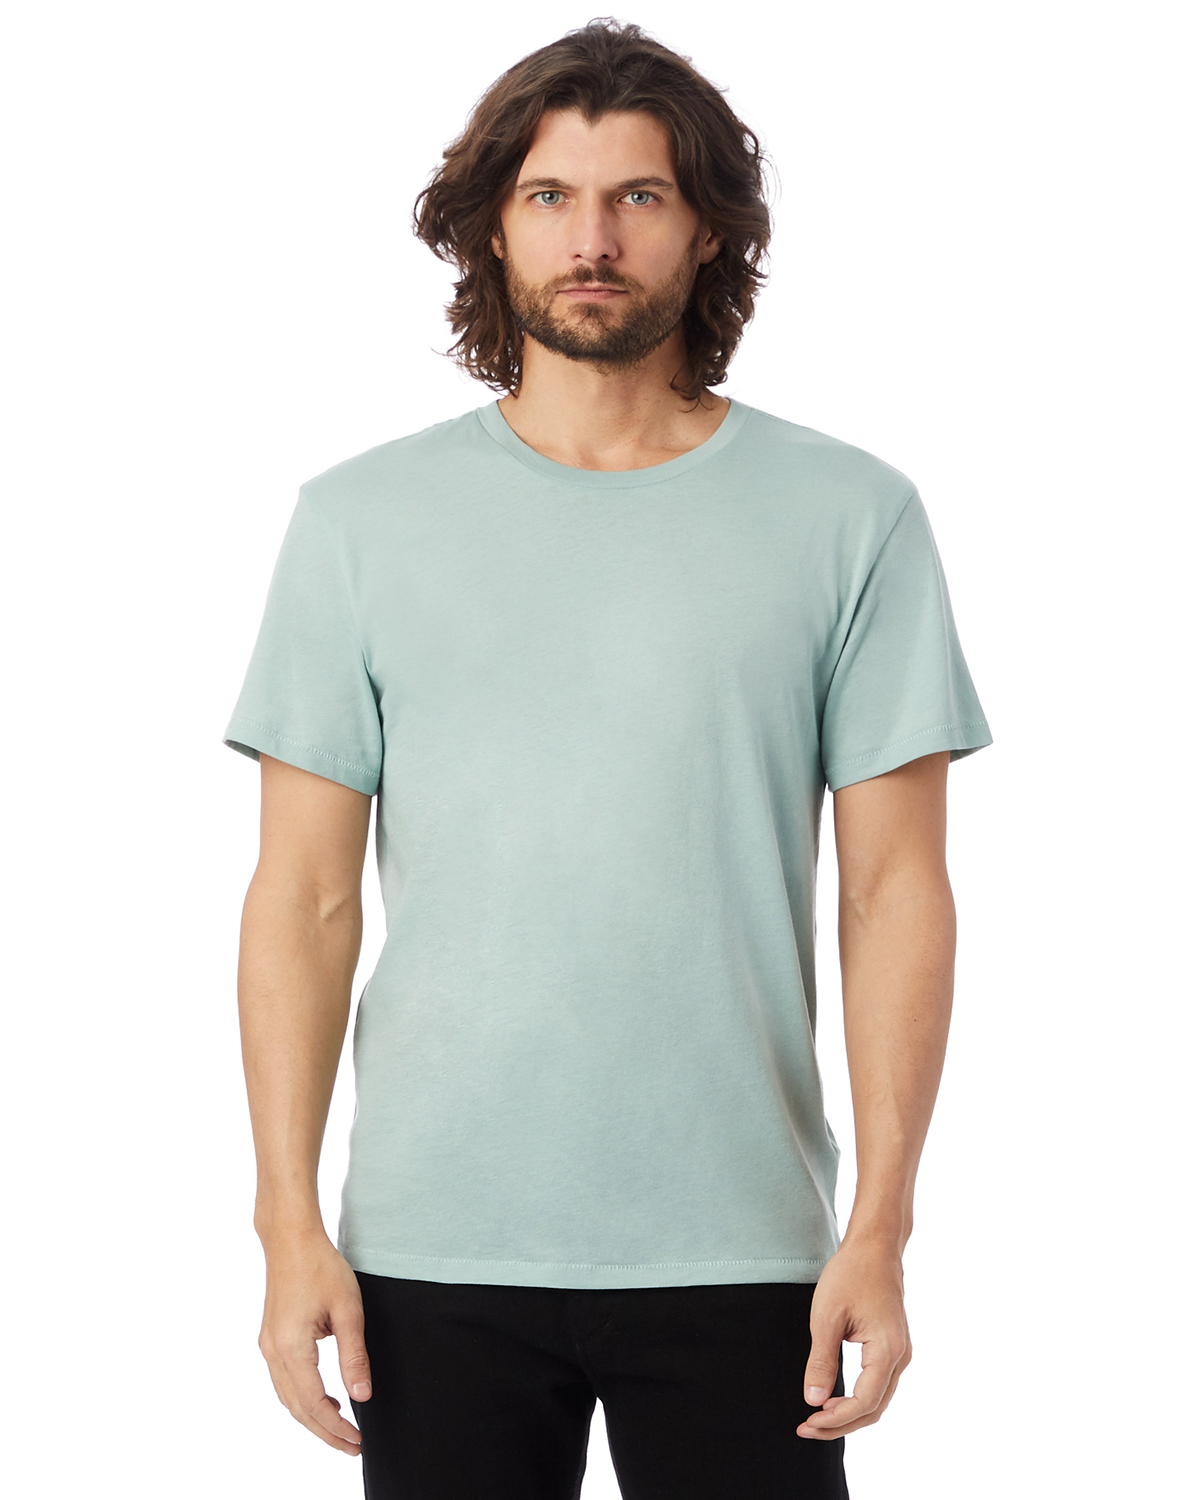 click to view Faded Teal